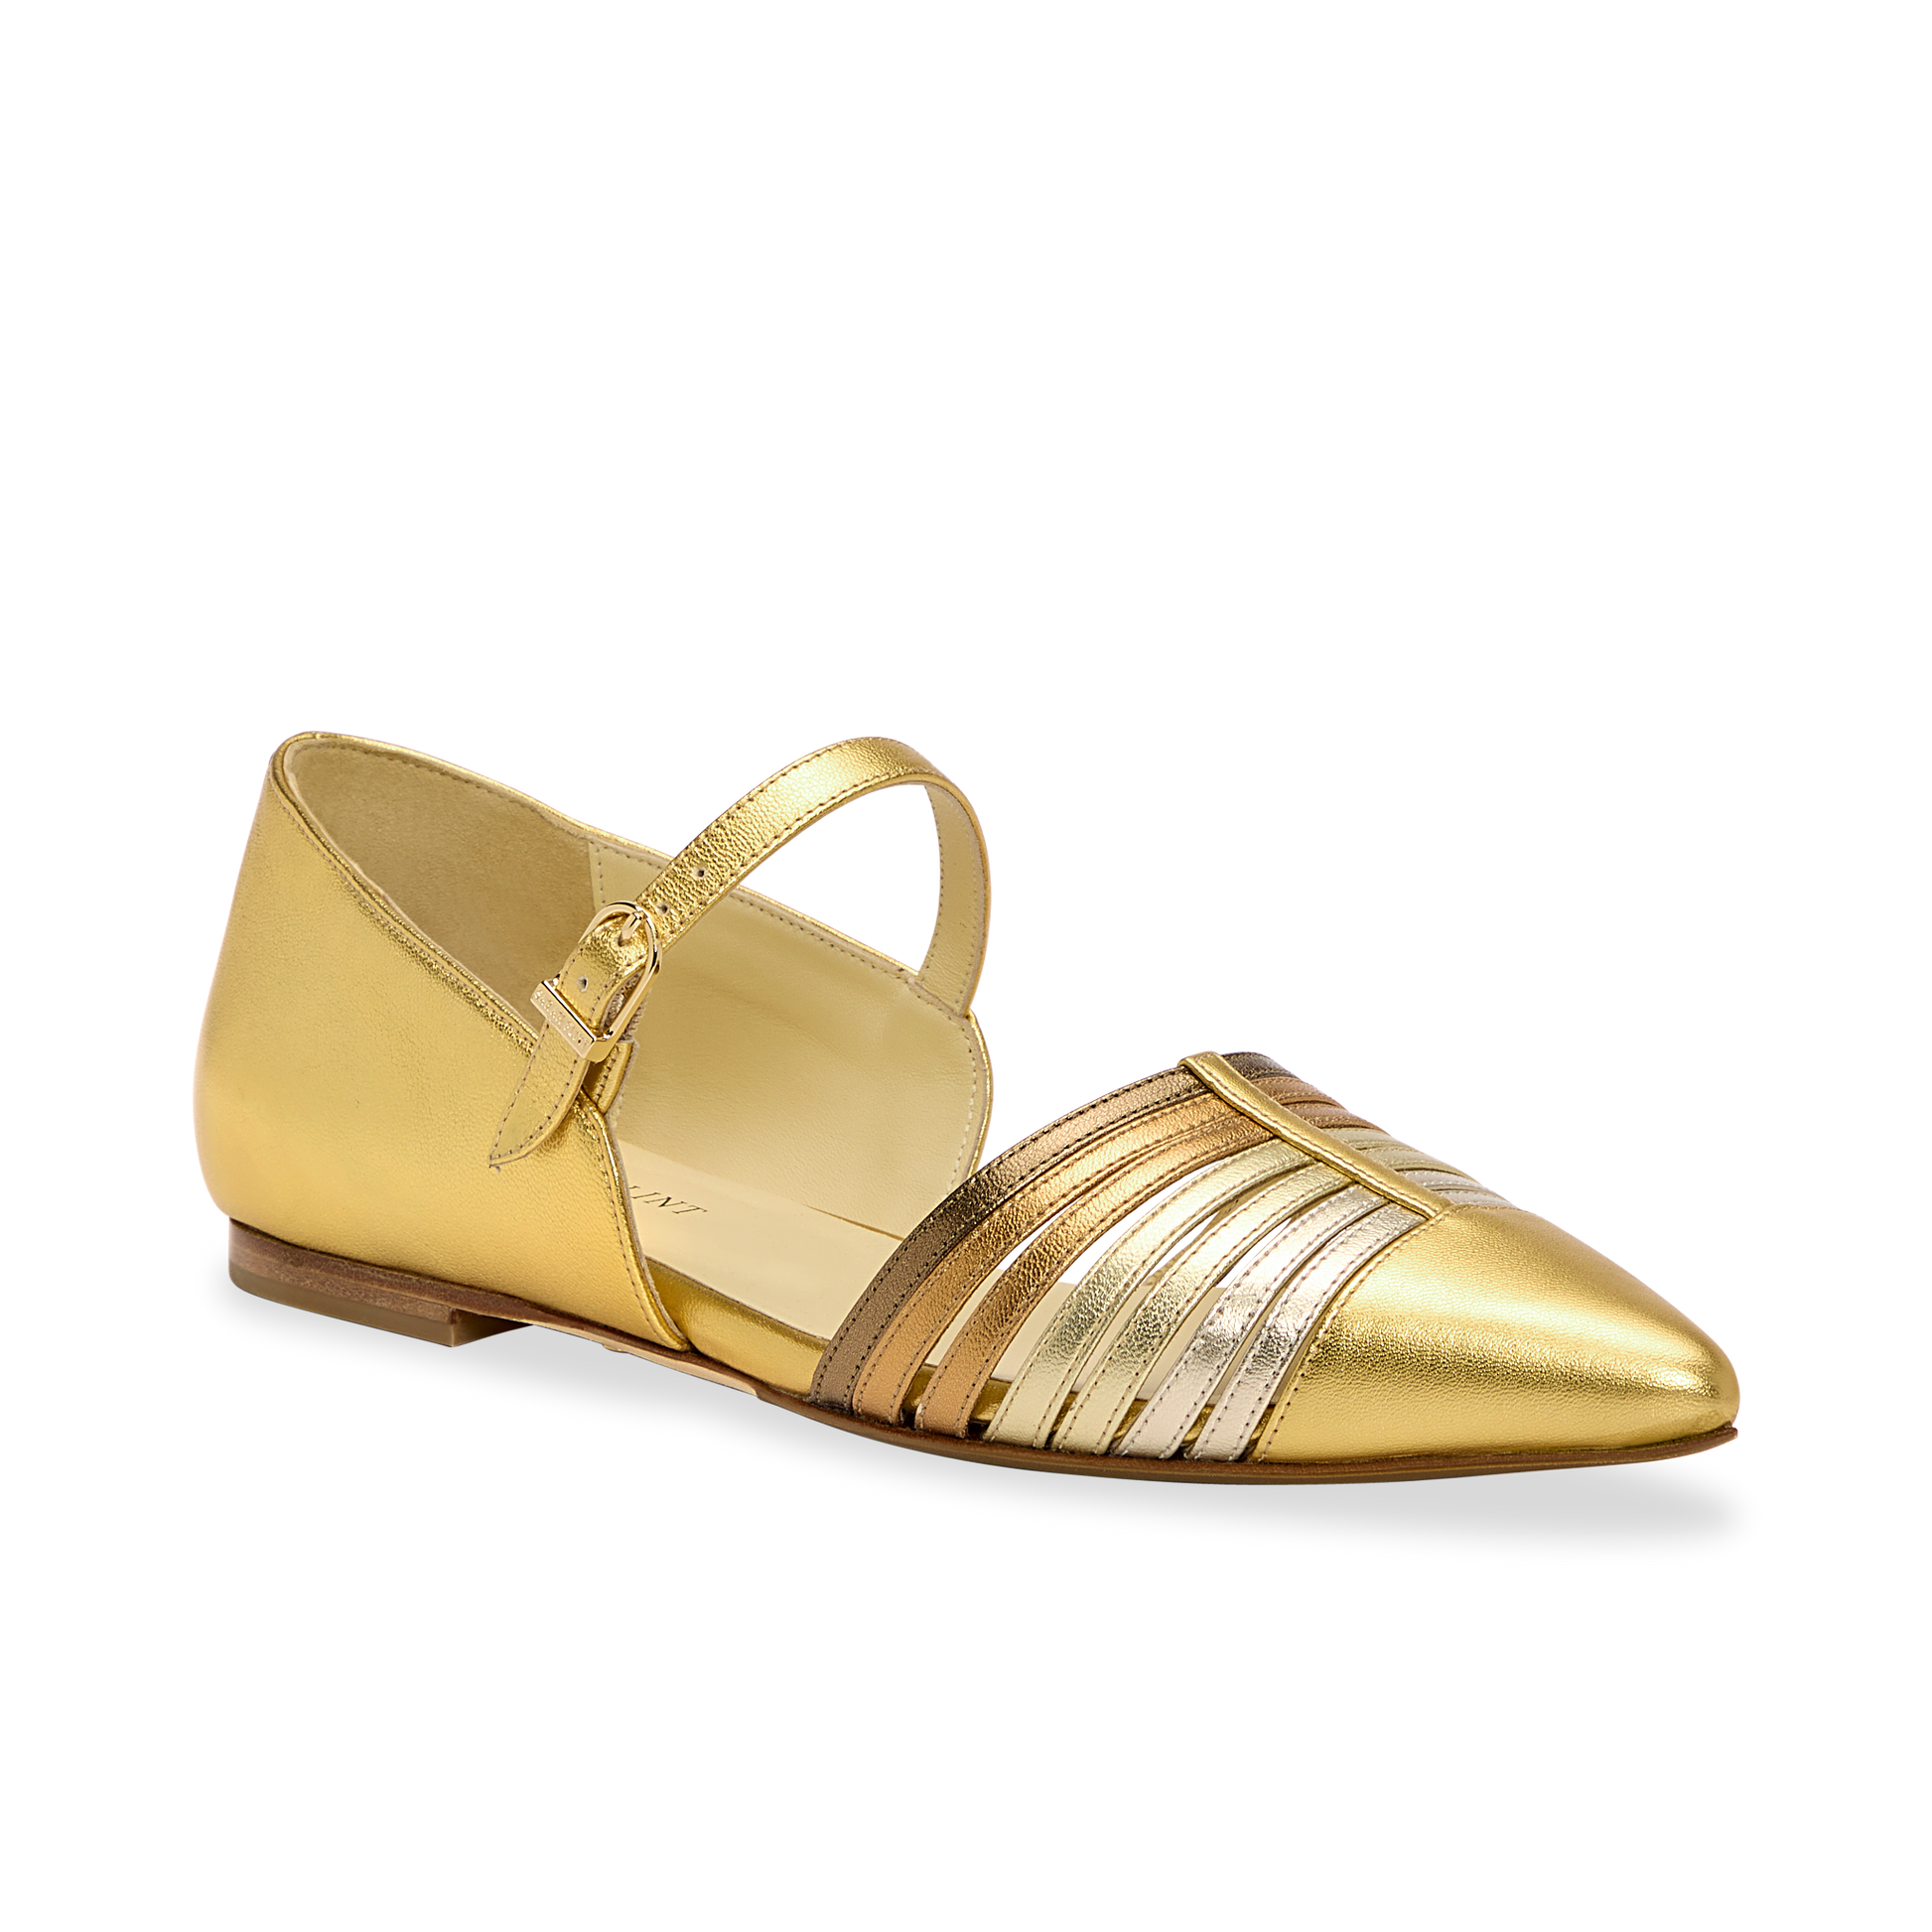 Aet D'Orsay in Bright Gold Ombre Nappa